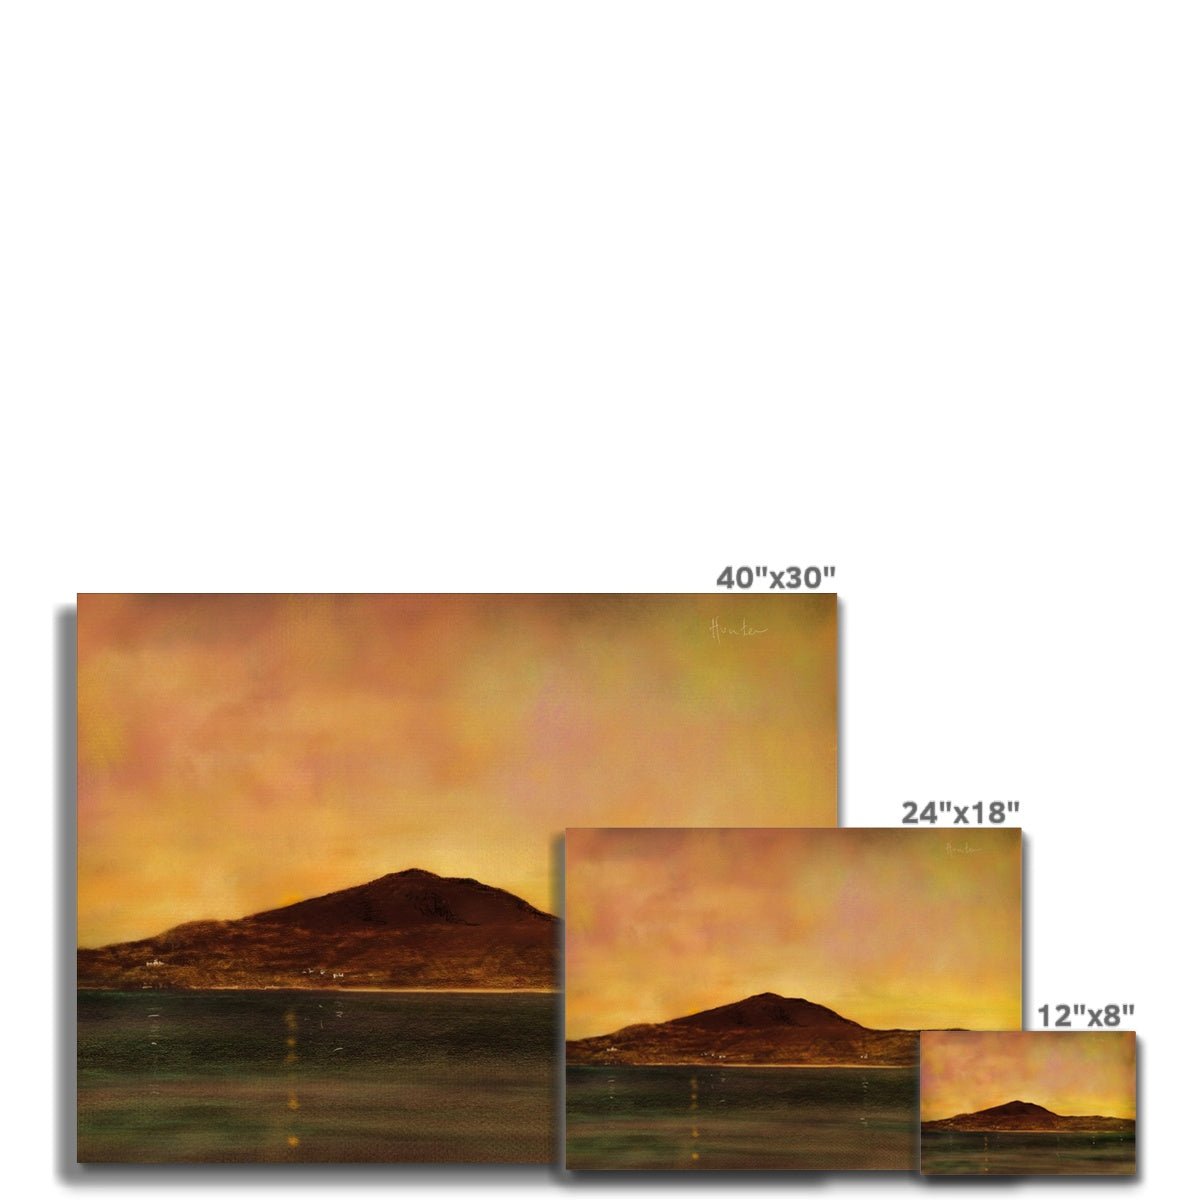 Eriskay Dusk Painting | Canvas From Scotland-Contemporary Stretched Canvas Prints-Hebridean Islands Art Gallery-Paintings, Prints, Homeware, Art Gifts From Scotland By Scottish Artist Kevin Hunter